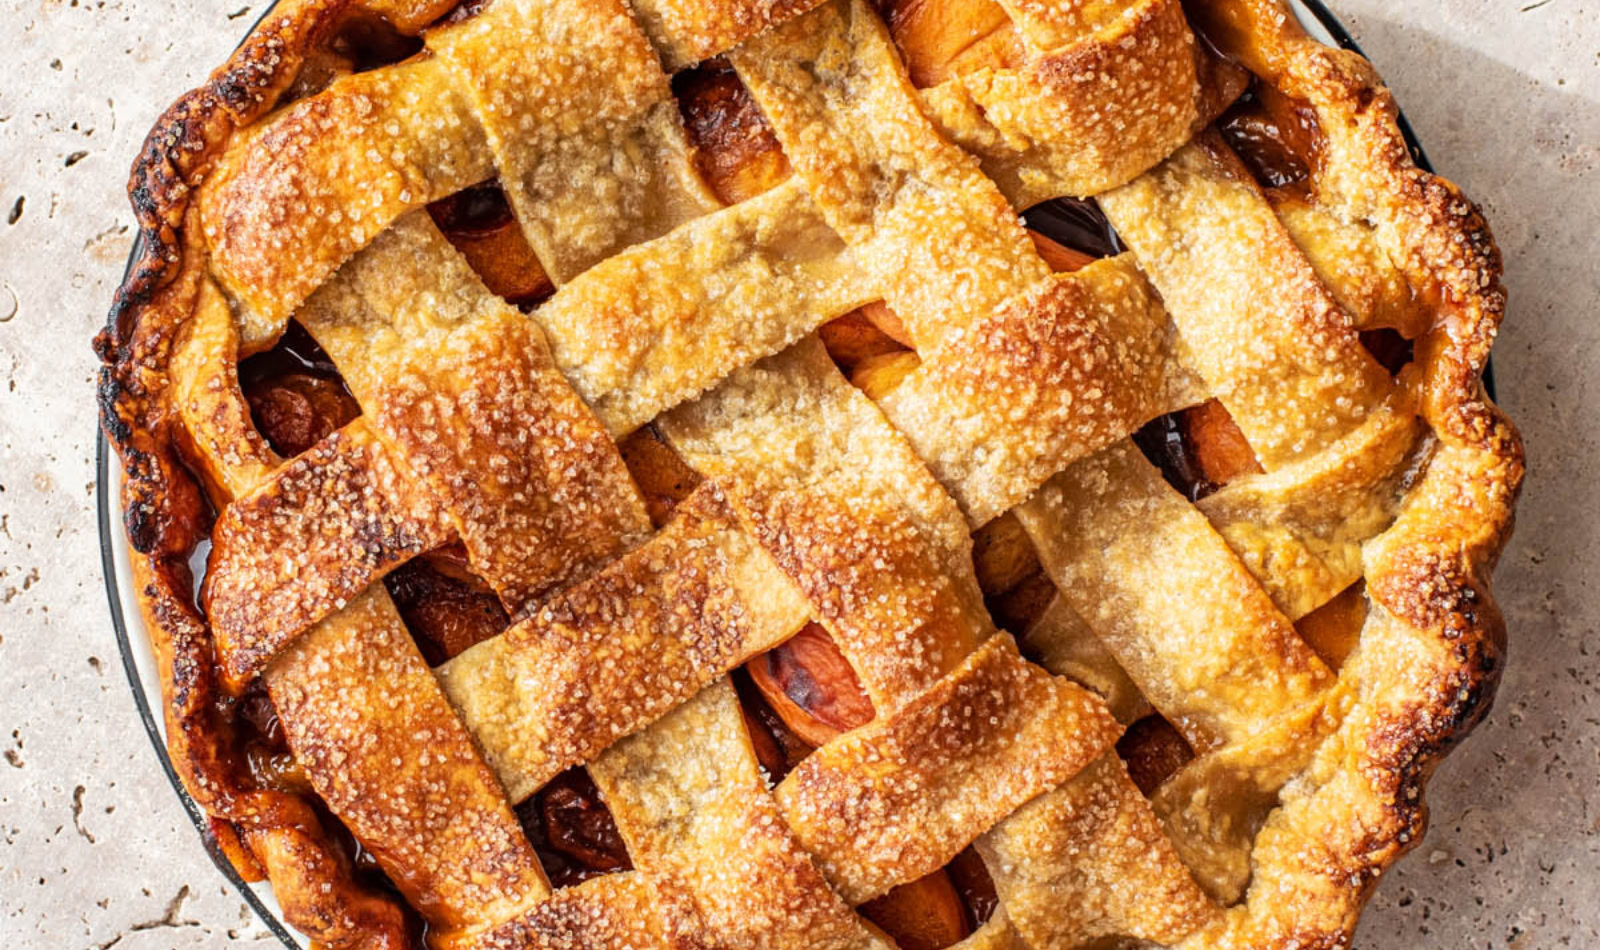 an apricot pie with lattice top crust
